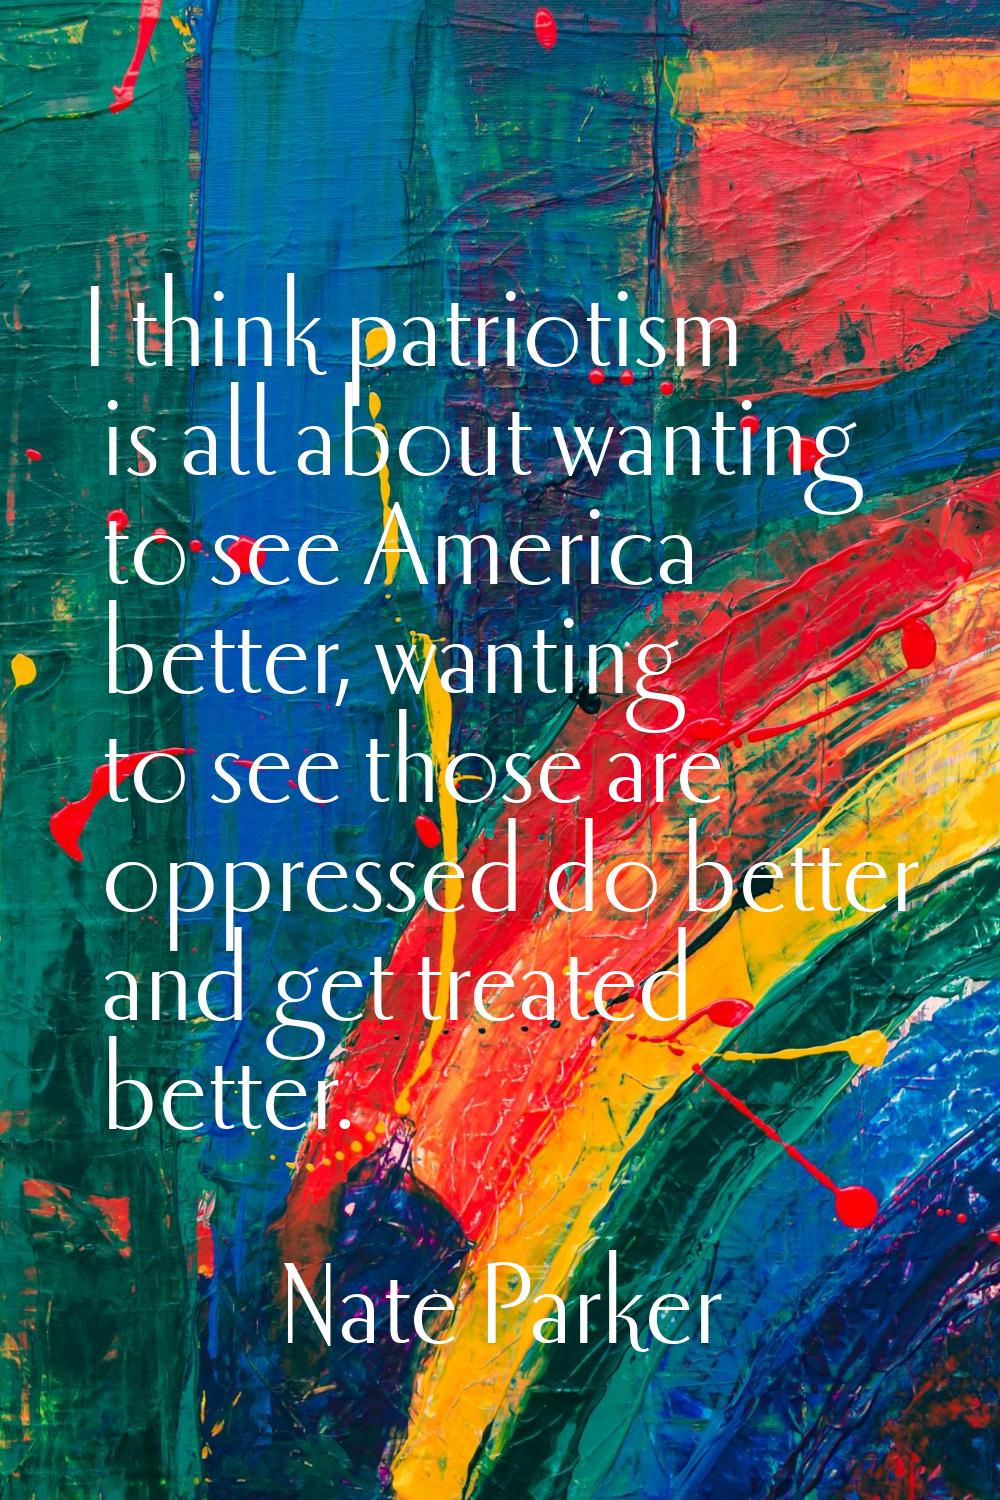 I think patriotism is all about wanting to see America better, wanting to see those are oppressed d